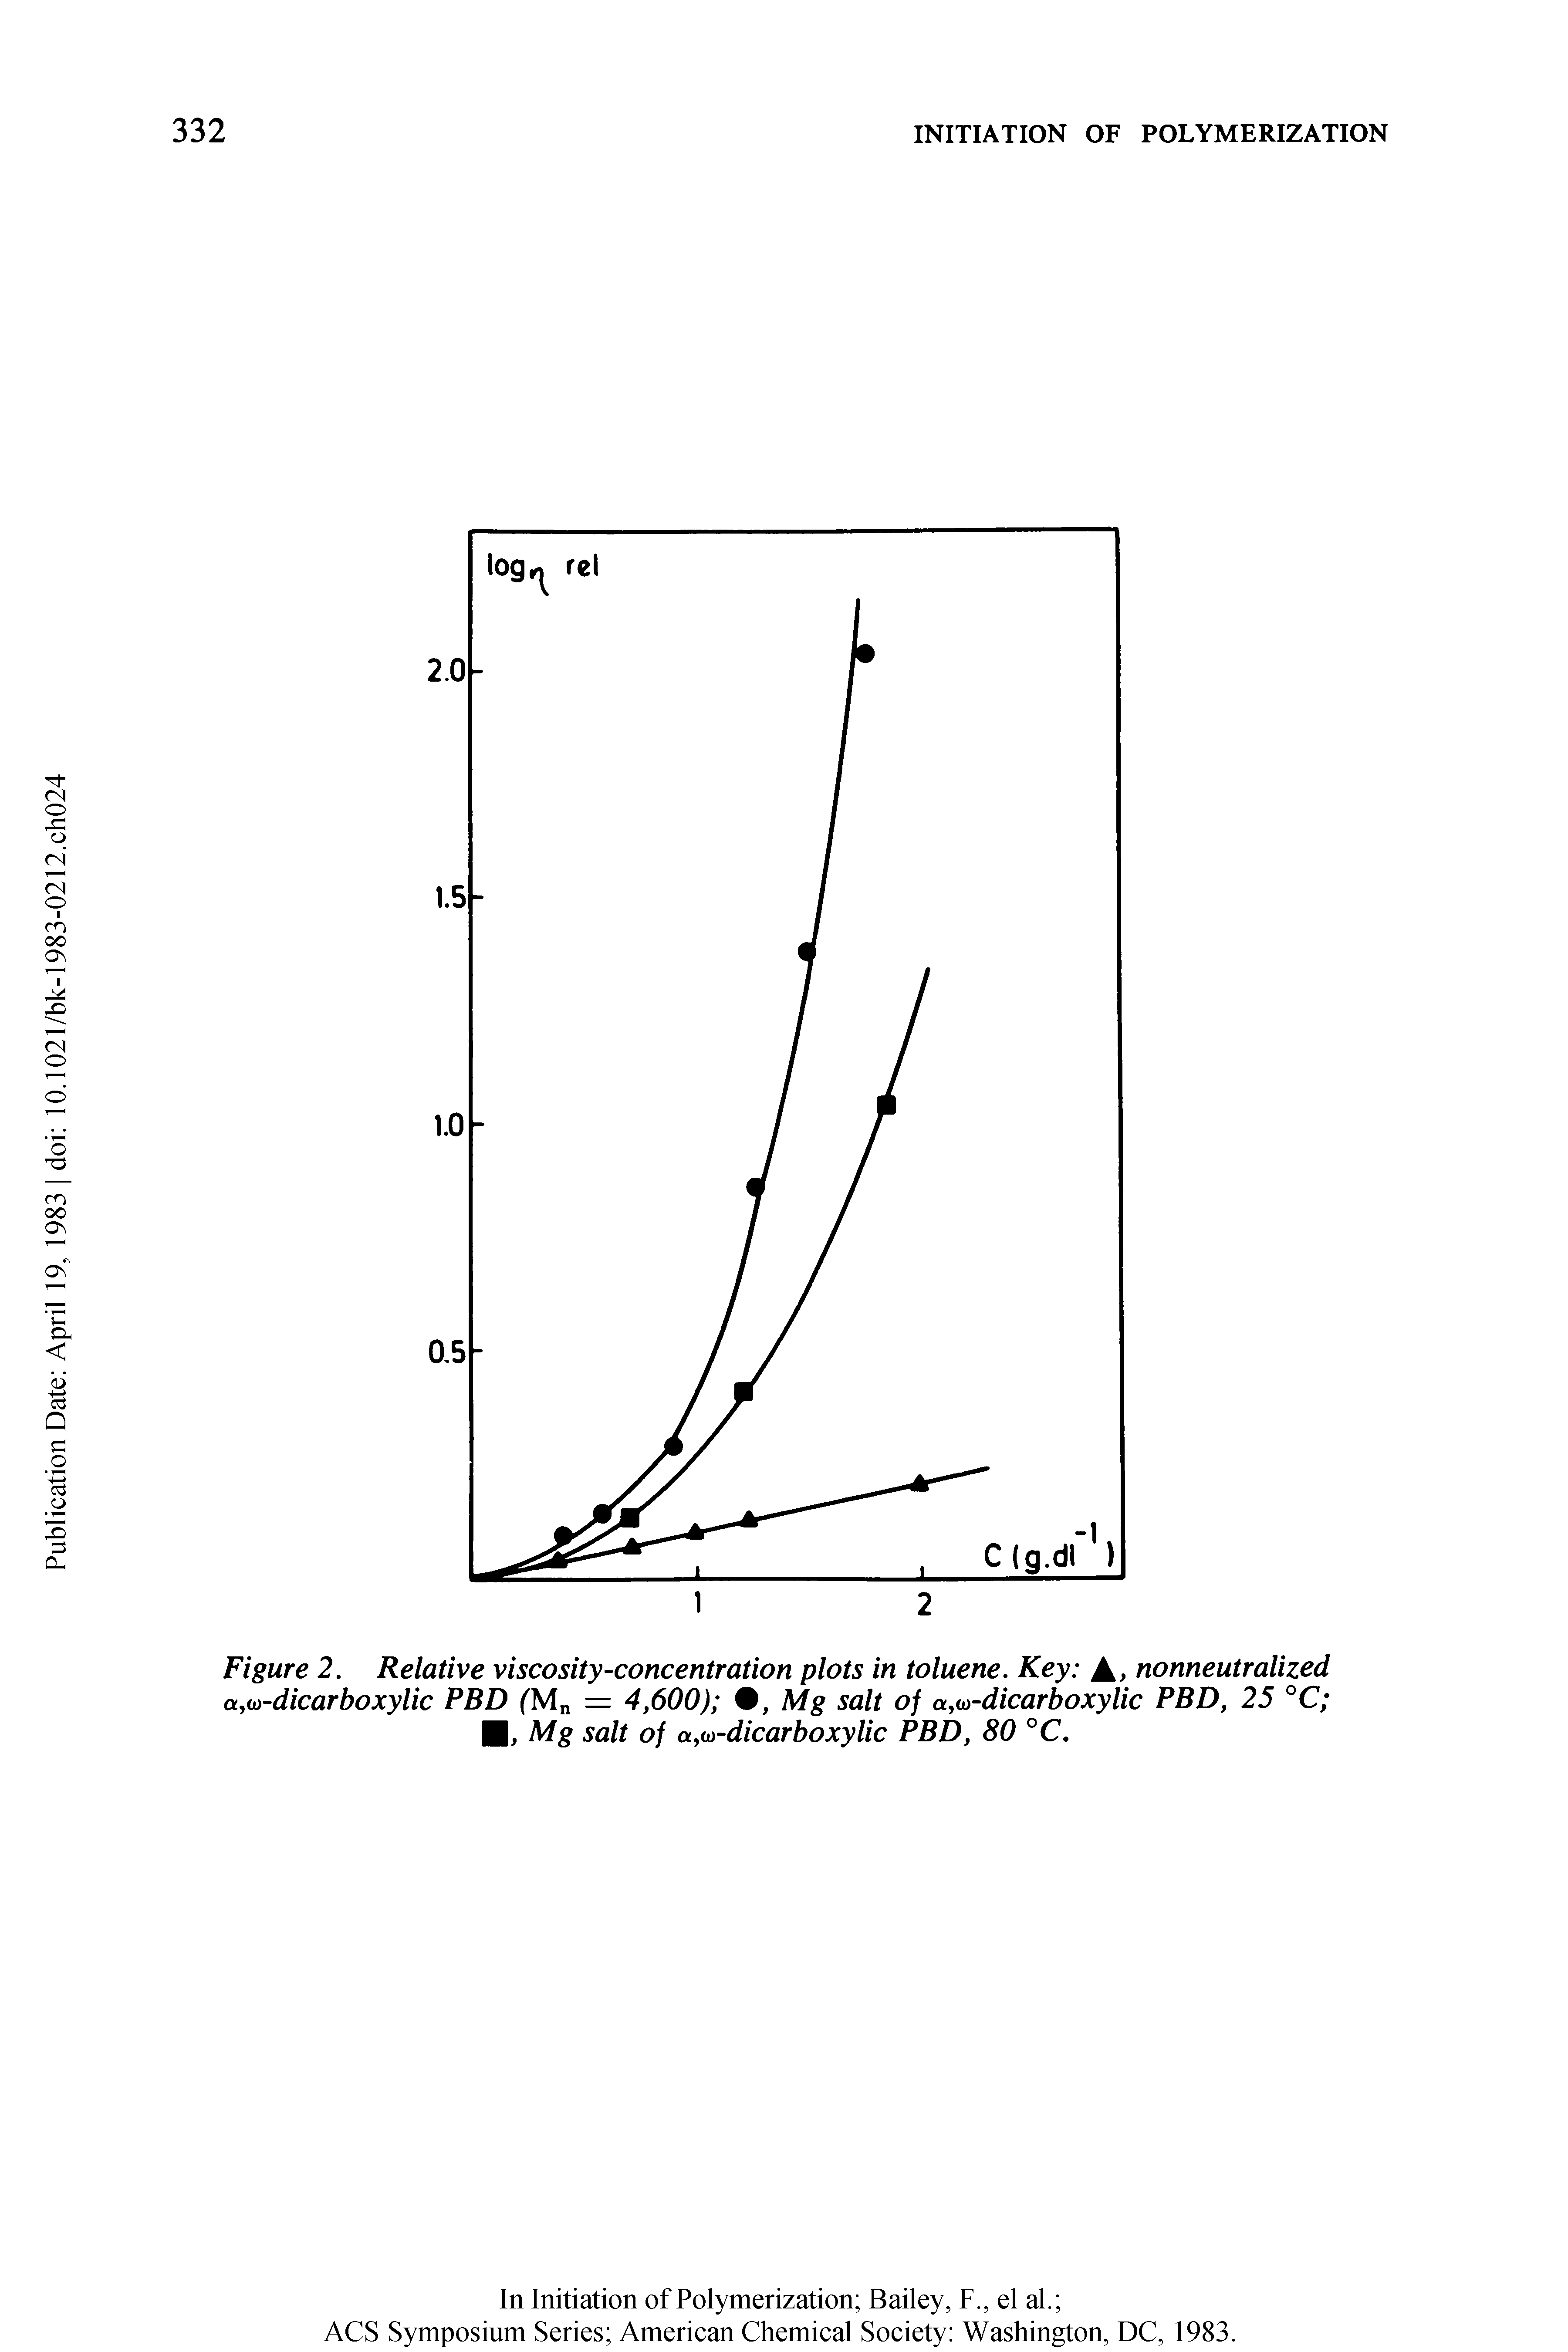 Figure 2. Relative viscosity-concentration plots in toluene. Key A. nonneutralized a,o)-dicarboxylic PBD ( Mn = 4,600) , Mg salt of a,o)-dicarboxylic PBD, 25 °C Mg salt of a,oi-dicarboxylic PBD, 80 °C.